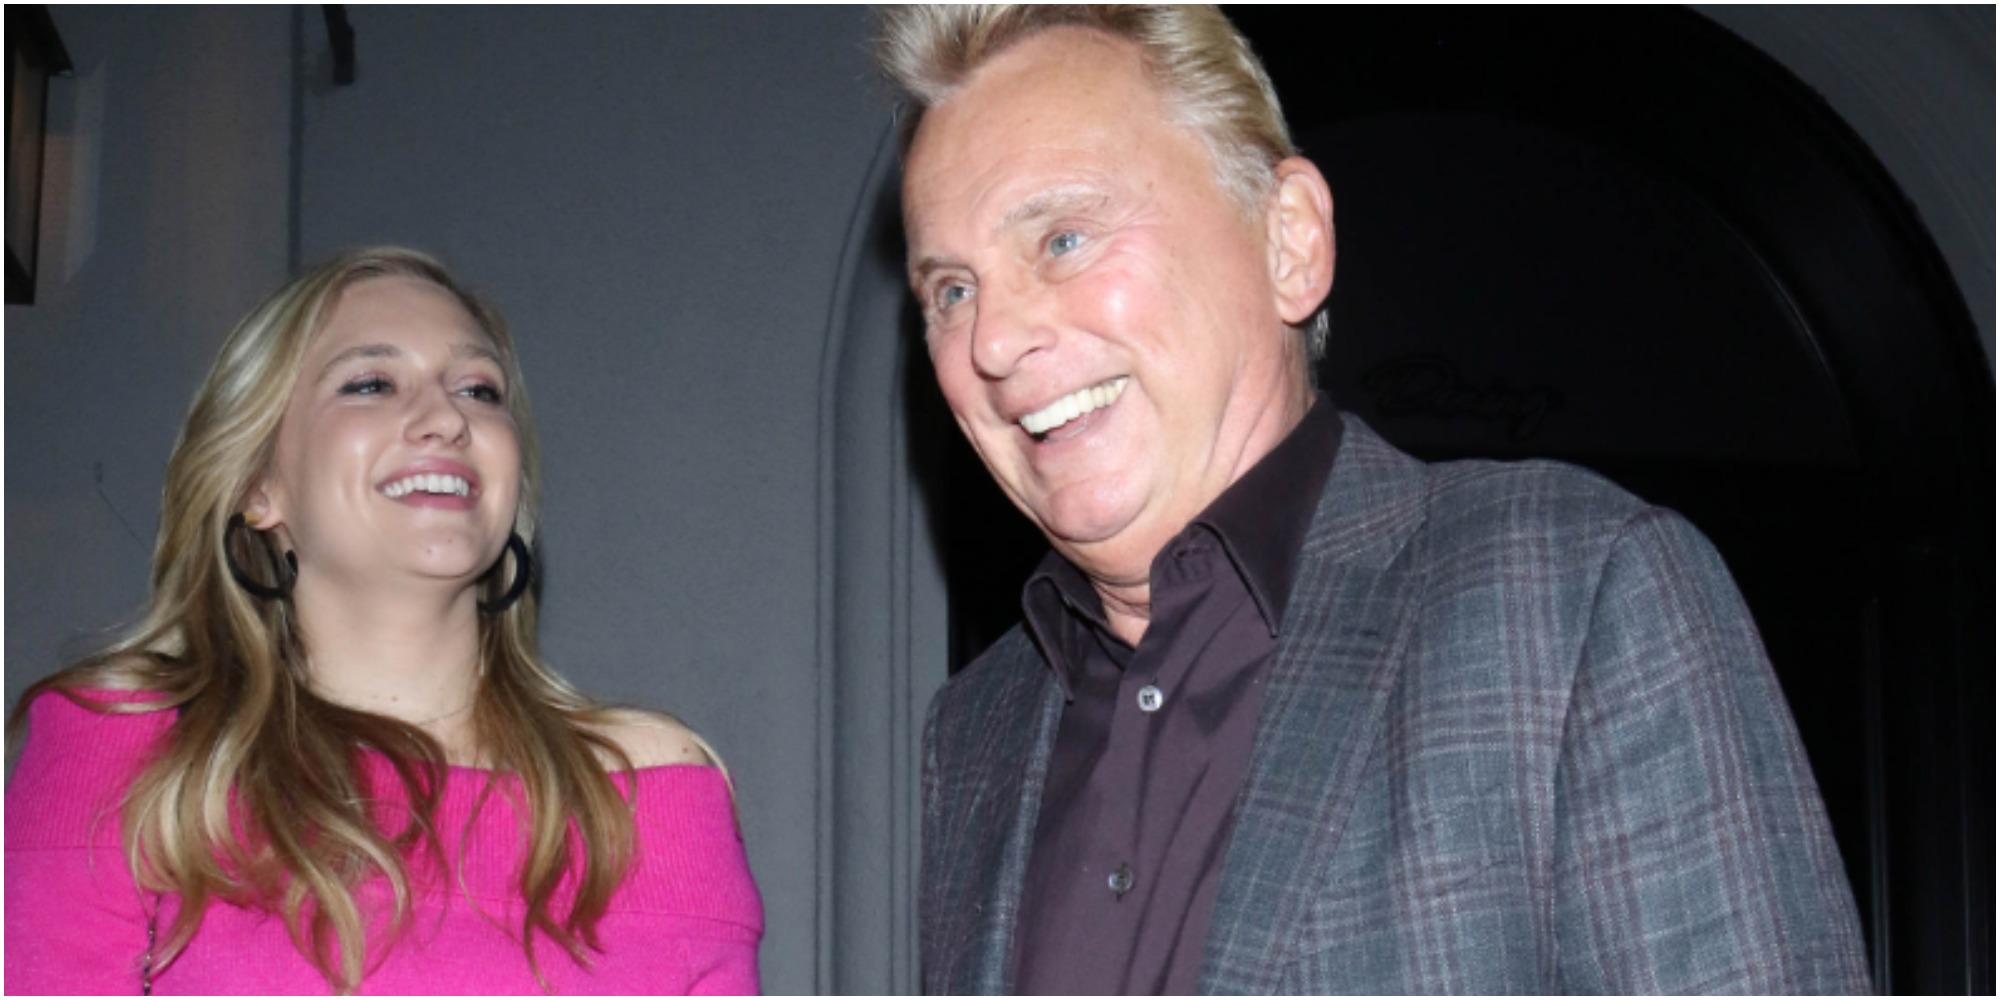 Maggie Sajak has joined her father Pat on "Wheel of Fortune" as its social correspondent.